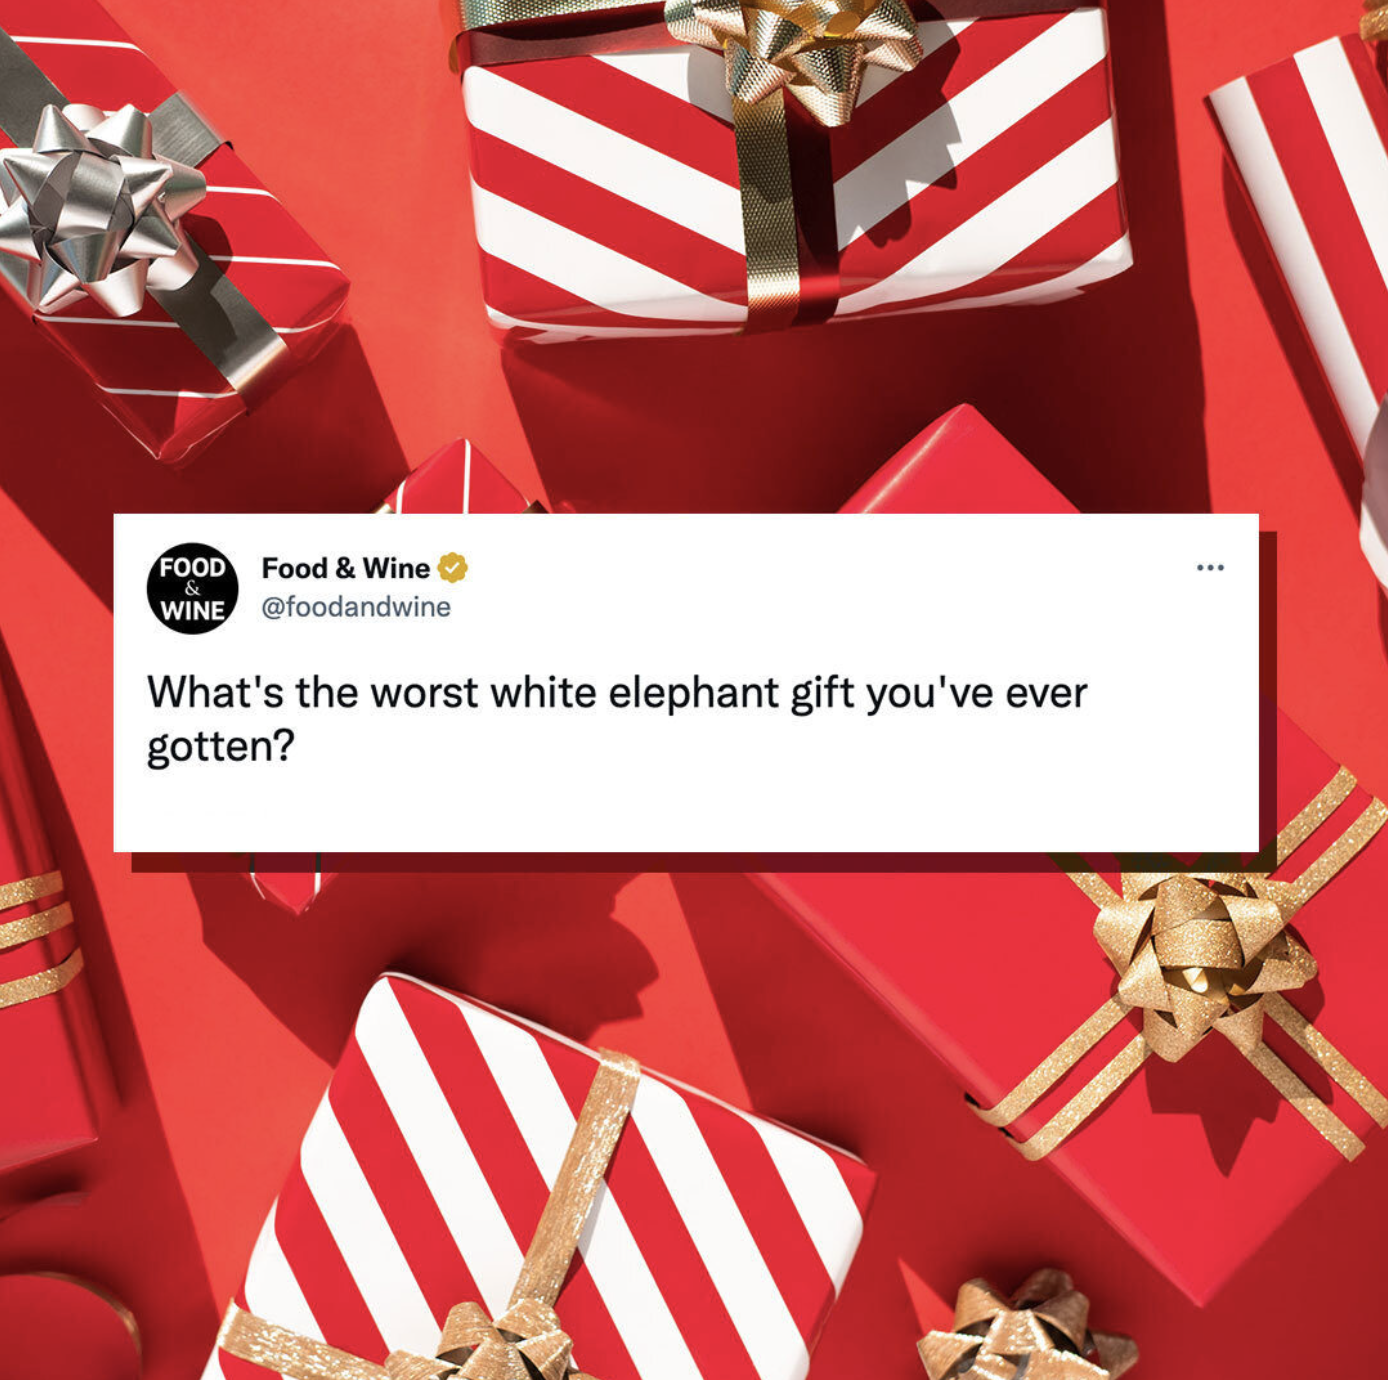 Hysterical Answers to the Question, “What’s the Worst White Elephant Gift You’ve Ever Gotten?”